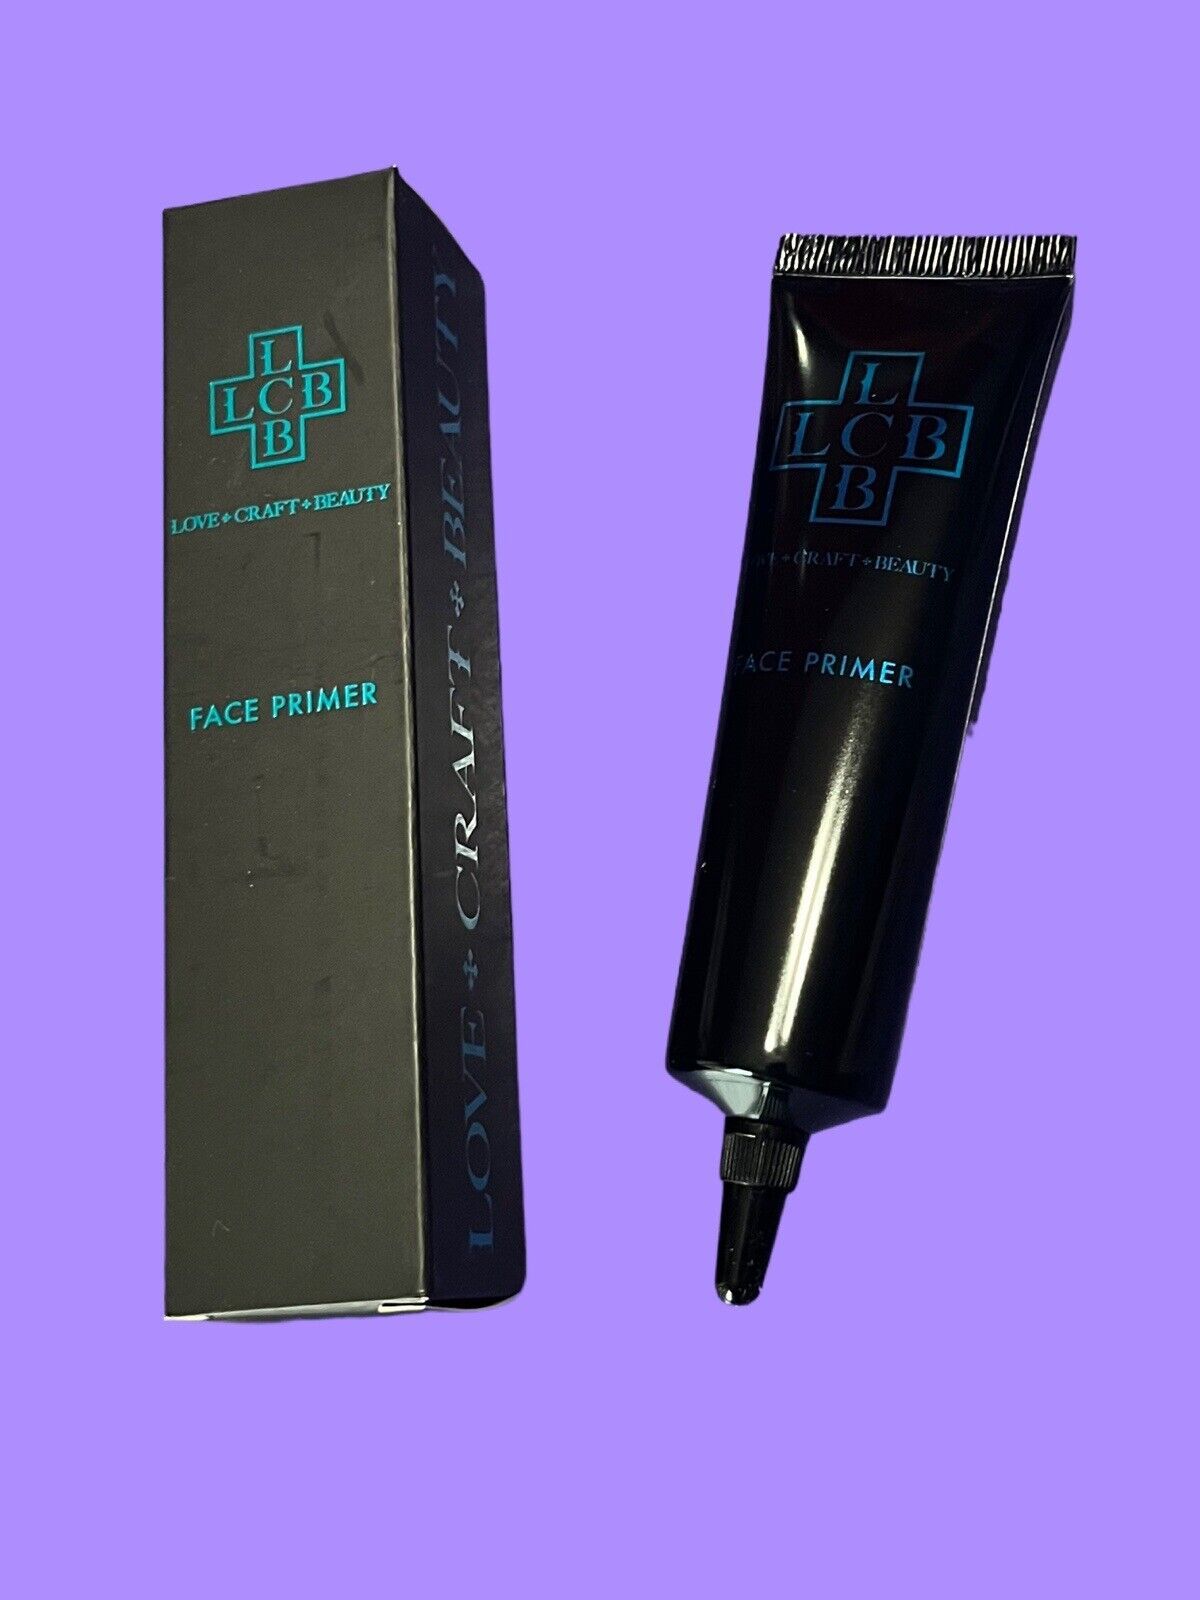 Primary image for LOVE+CRAFT+BEAUTY Face Primer 30 ml NIB